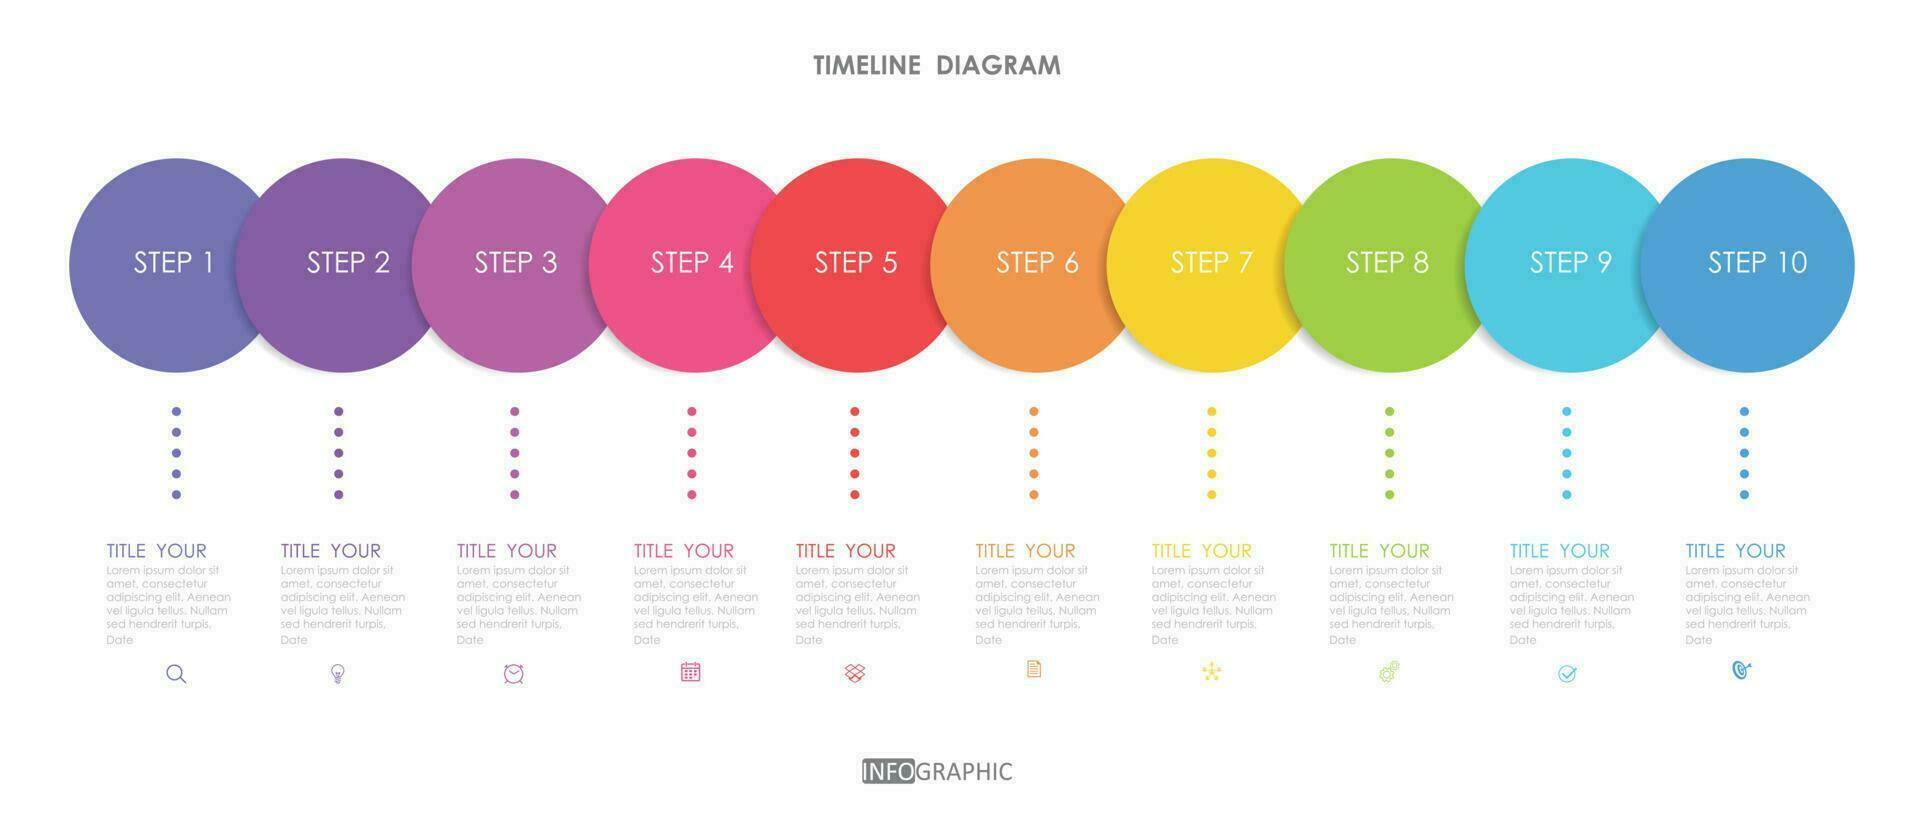 timeline roadmap project diagram Infographic template for business. 10 step modern Timeline diagram with presentation vector timeline roadmap infographic.